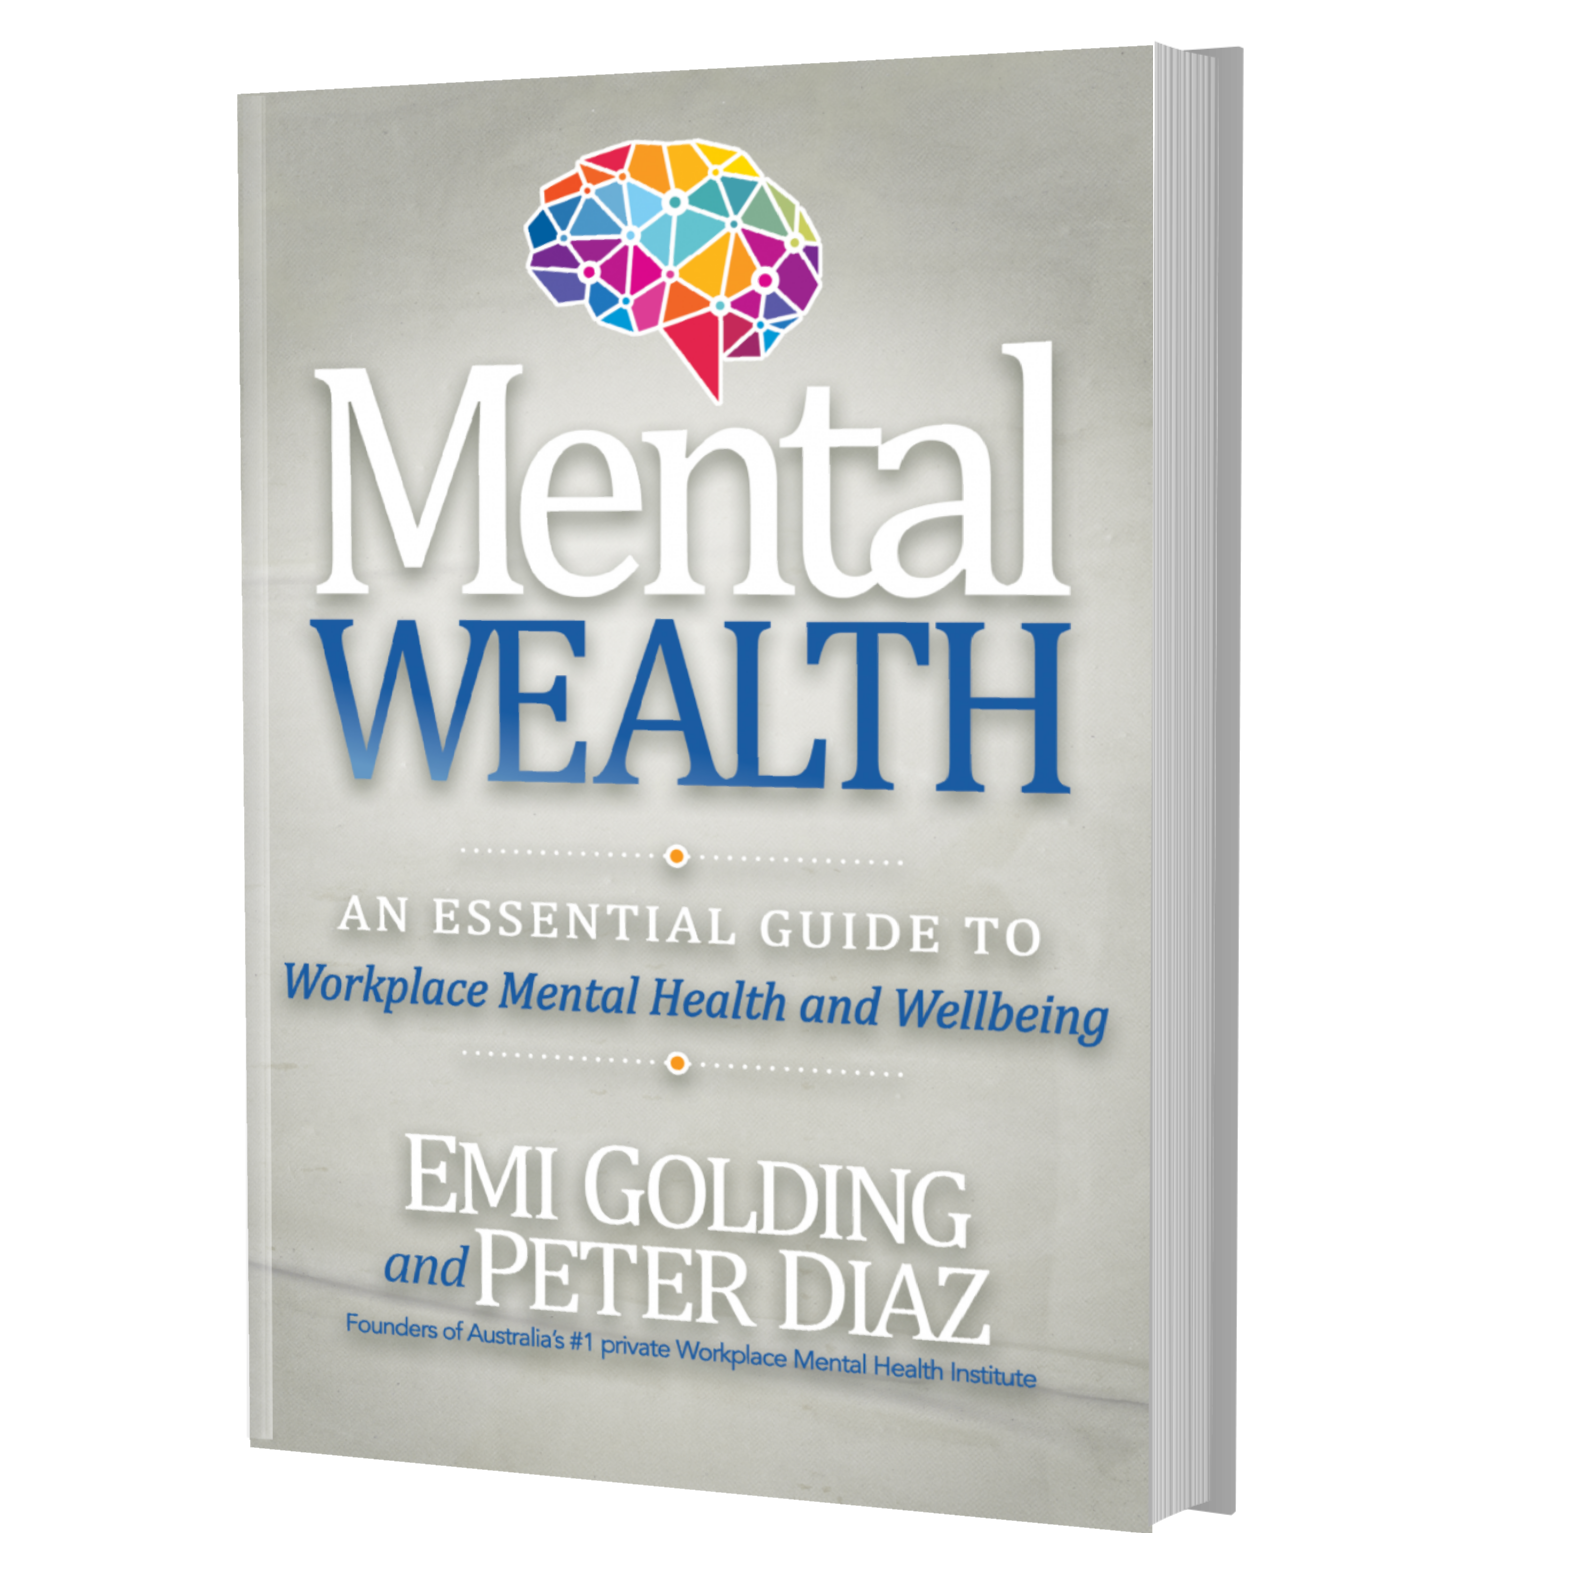 Mental Wealth book by Emi Golding and Peter Diaz